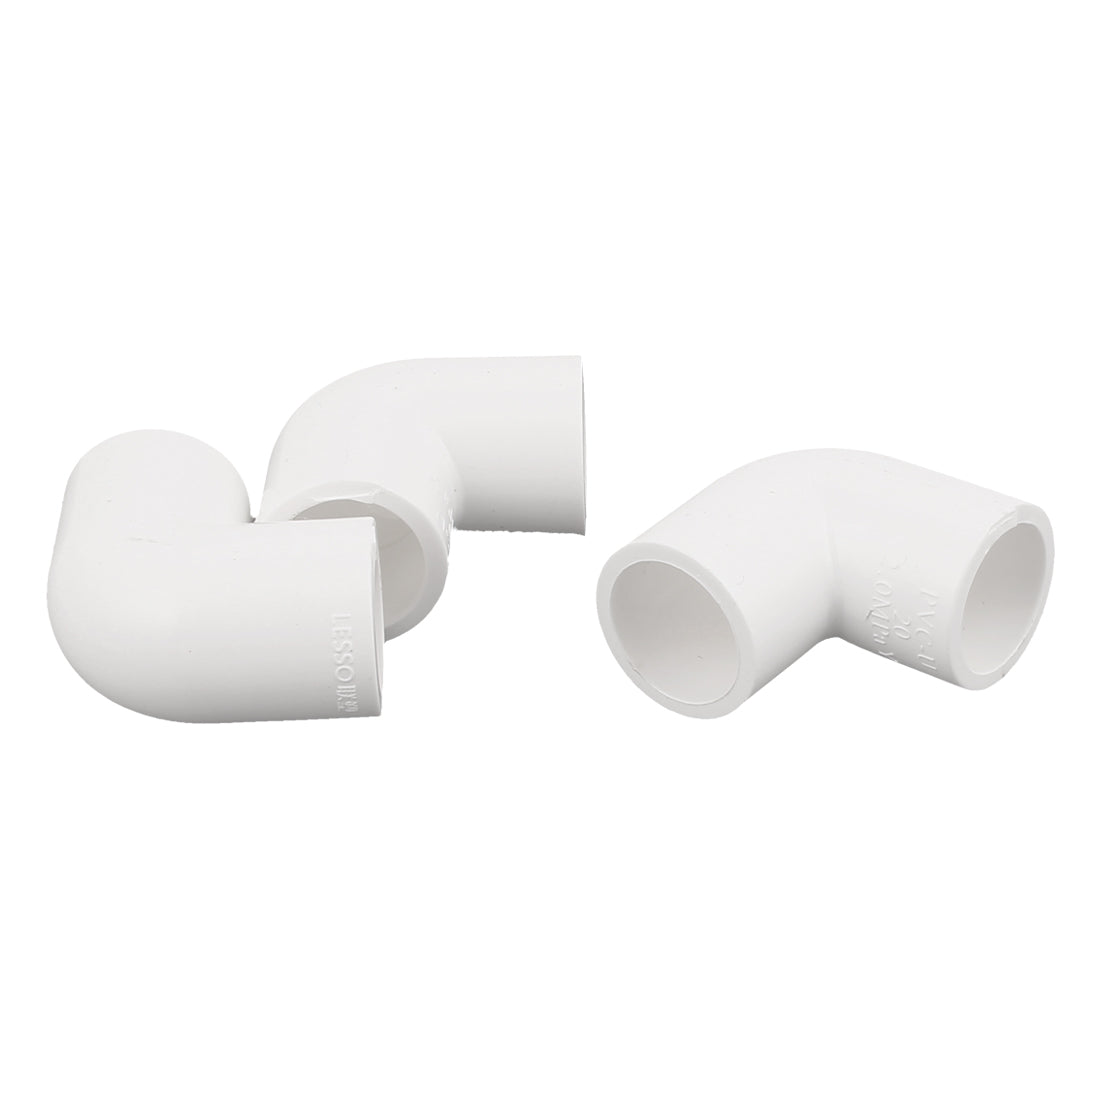 Uxcell Uxcell PVC-U 90 Degree Elbow 20mm Dia Drainage Pipe Adapter Connector White 3 Pcs